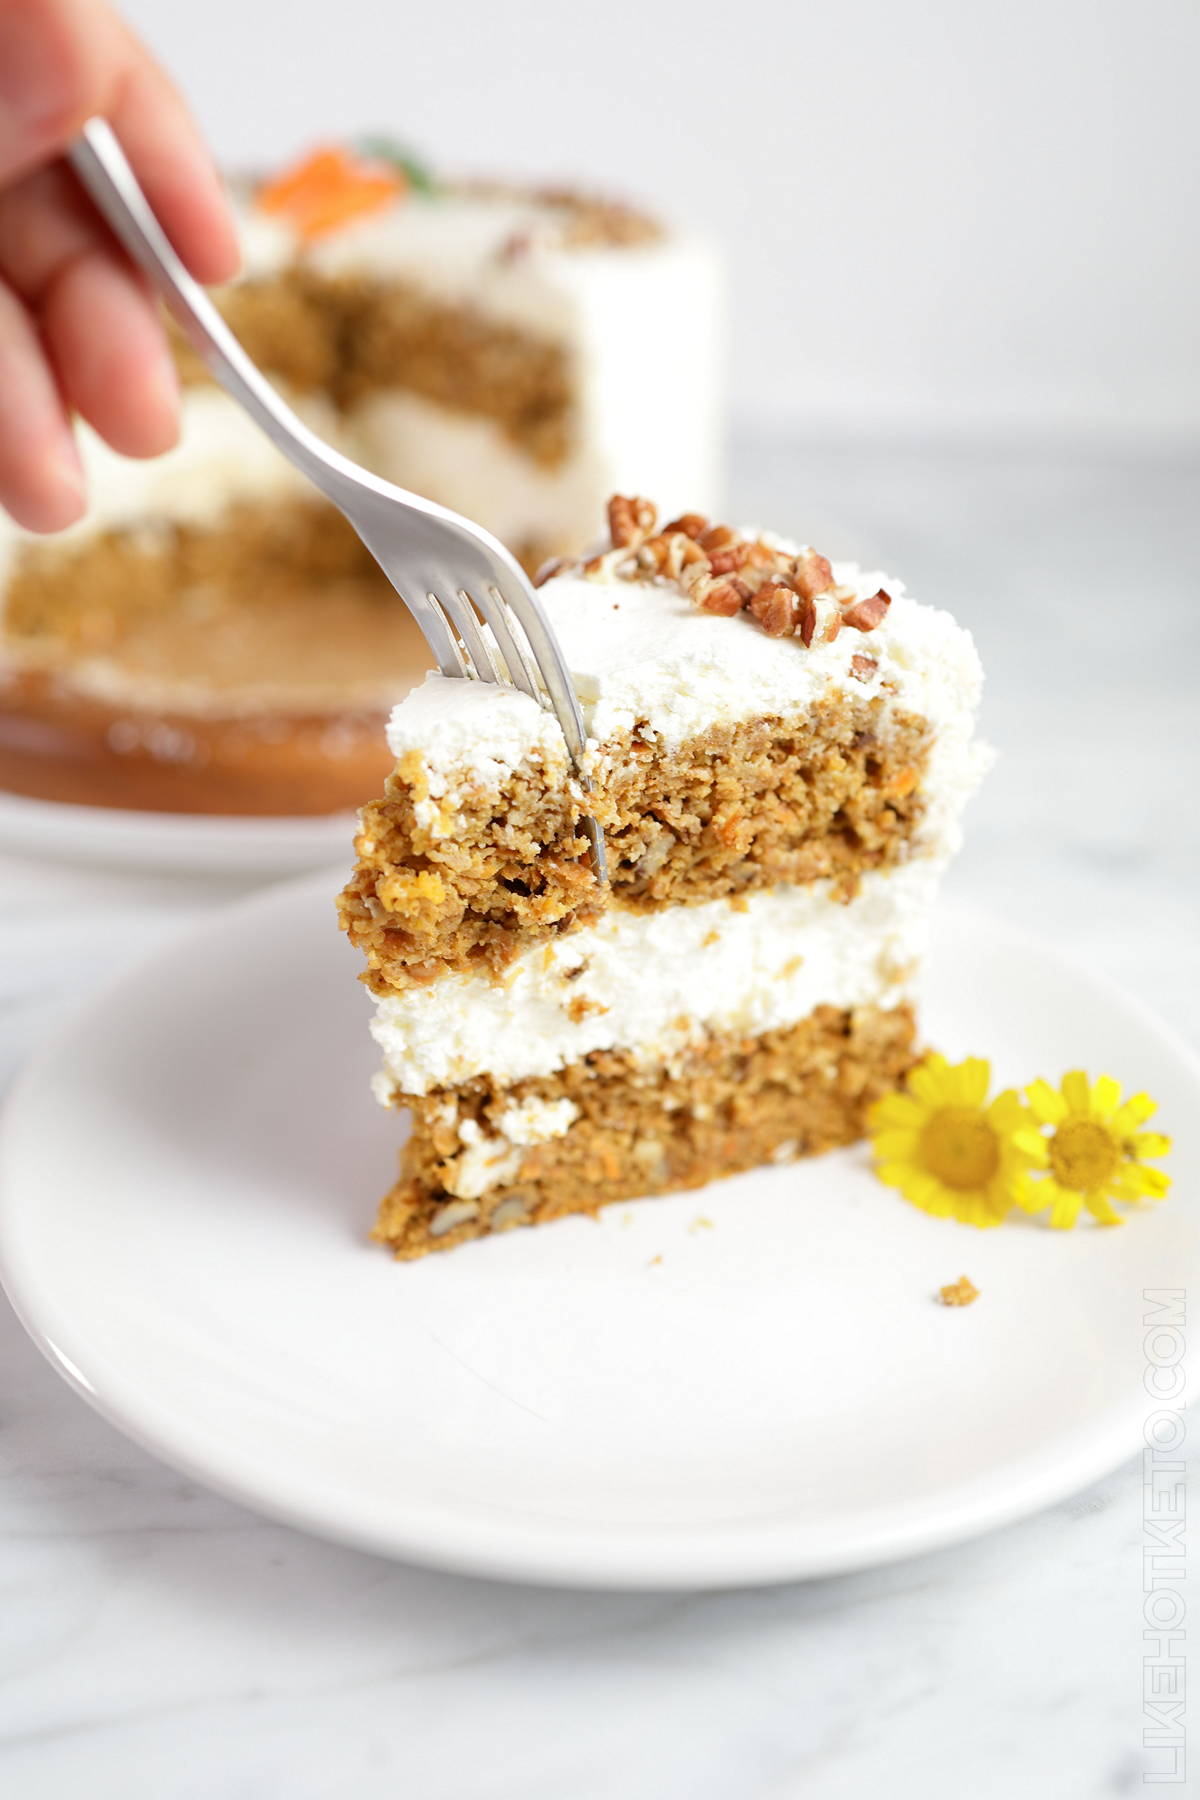 A fork cutting into a big slice of keto carrot cake with cream cheese frosting, on a white plate next to small yellow flowers, with the sliced cake on the background.